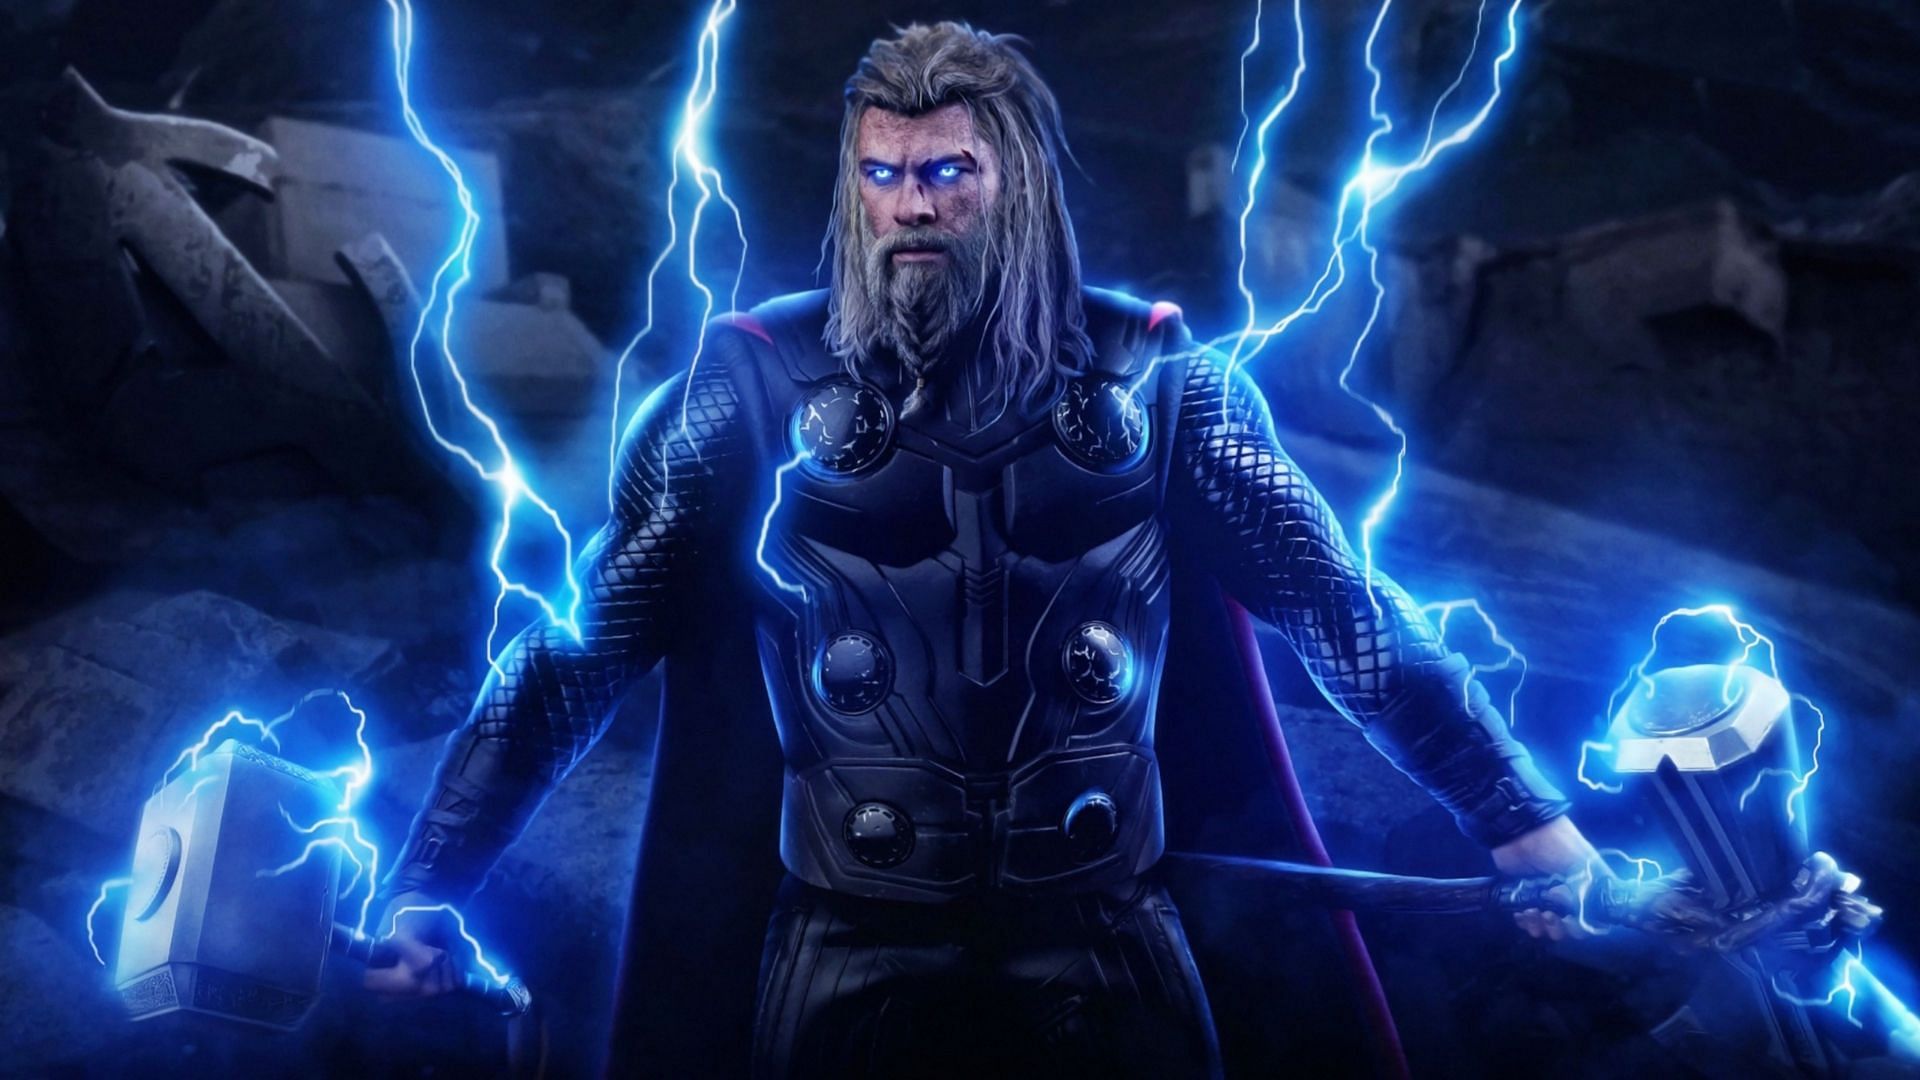 Thor is the Asgardian God of Thunder, the strongest of the Norse gods. (Image via Marvel)